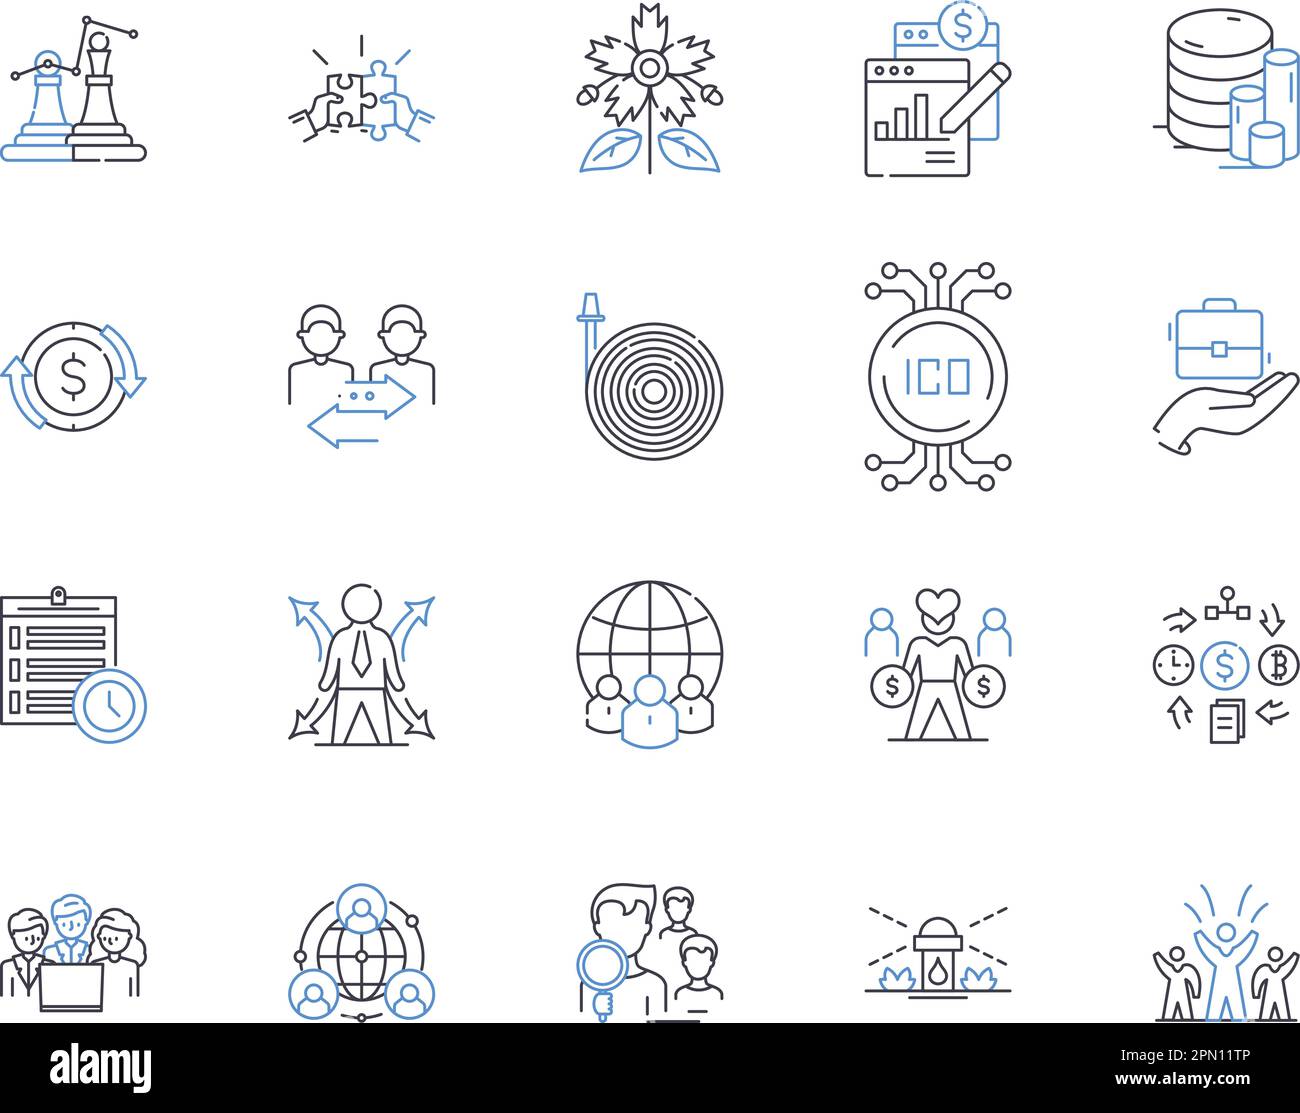 Farming sector outline icons collection. Farming, Sector, Agriculture, Crops, Production, Harvest, Tillage vector and illustration concept set Stock Vector